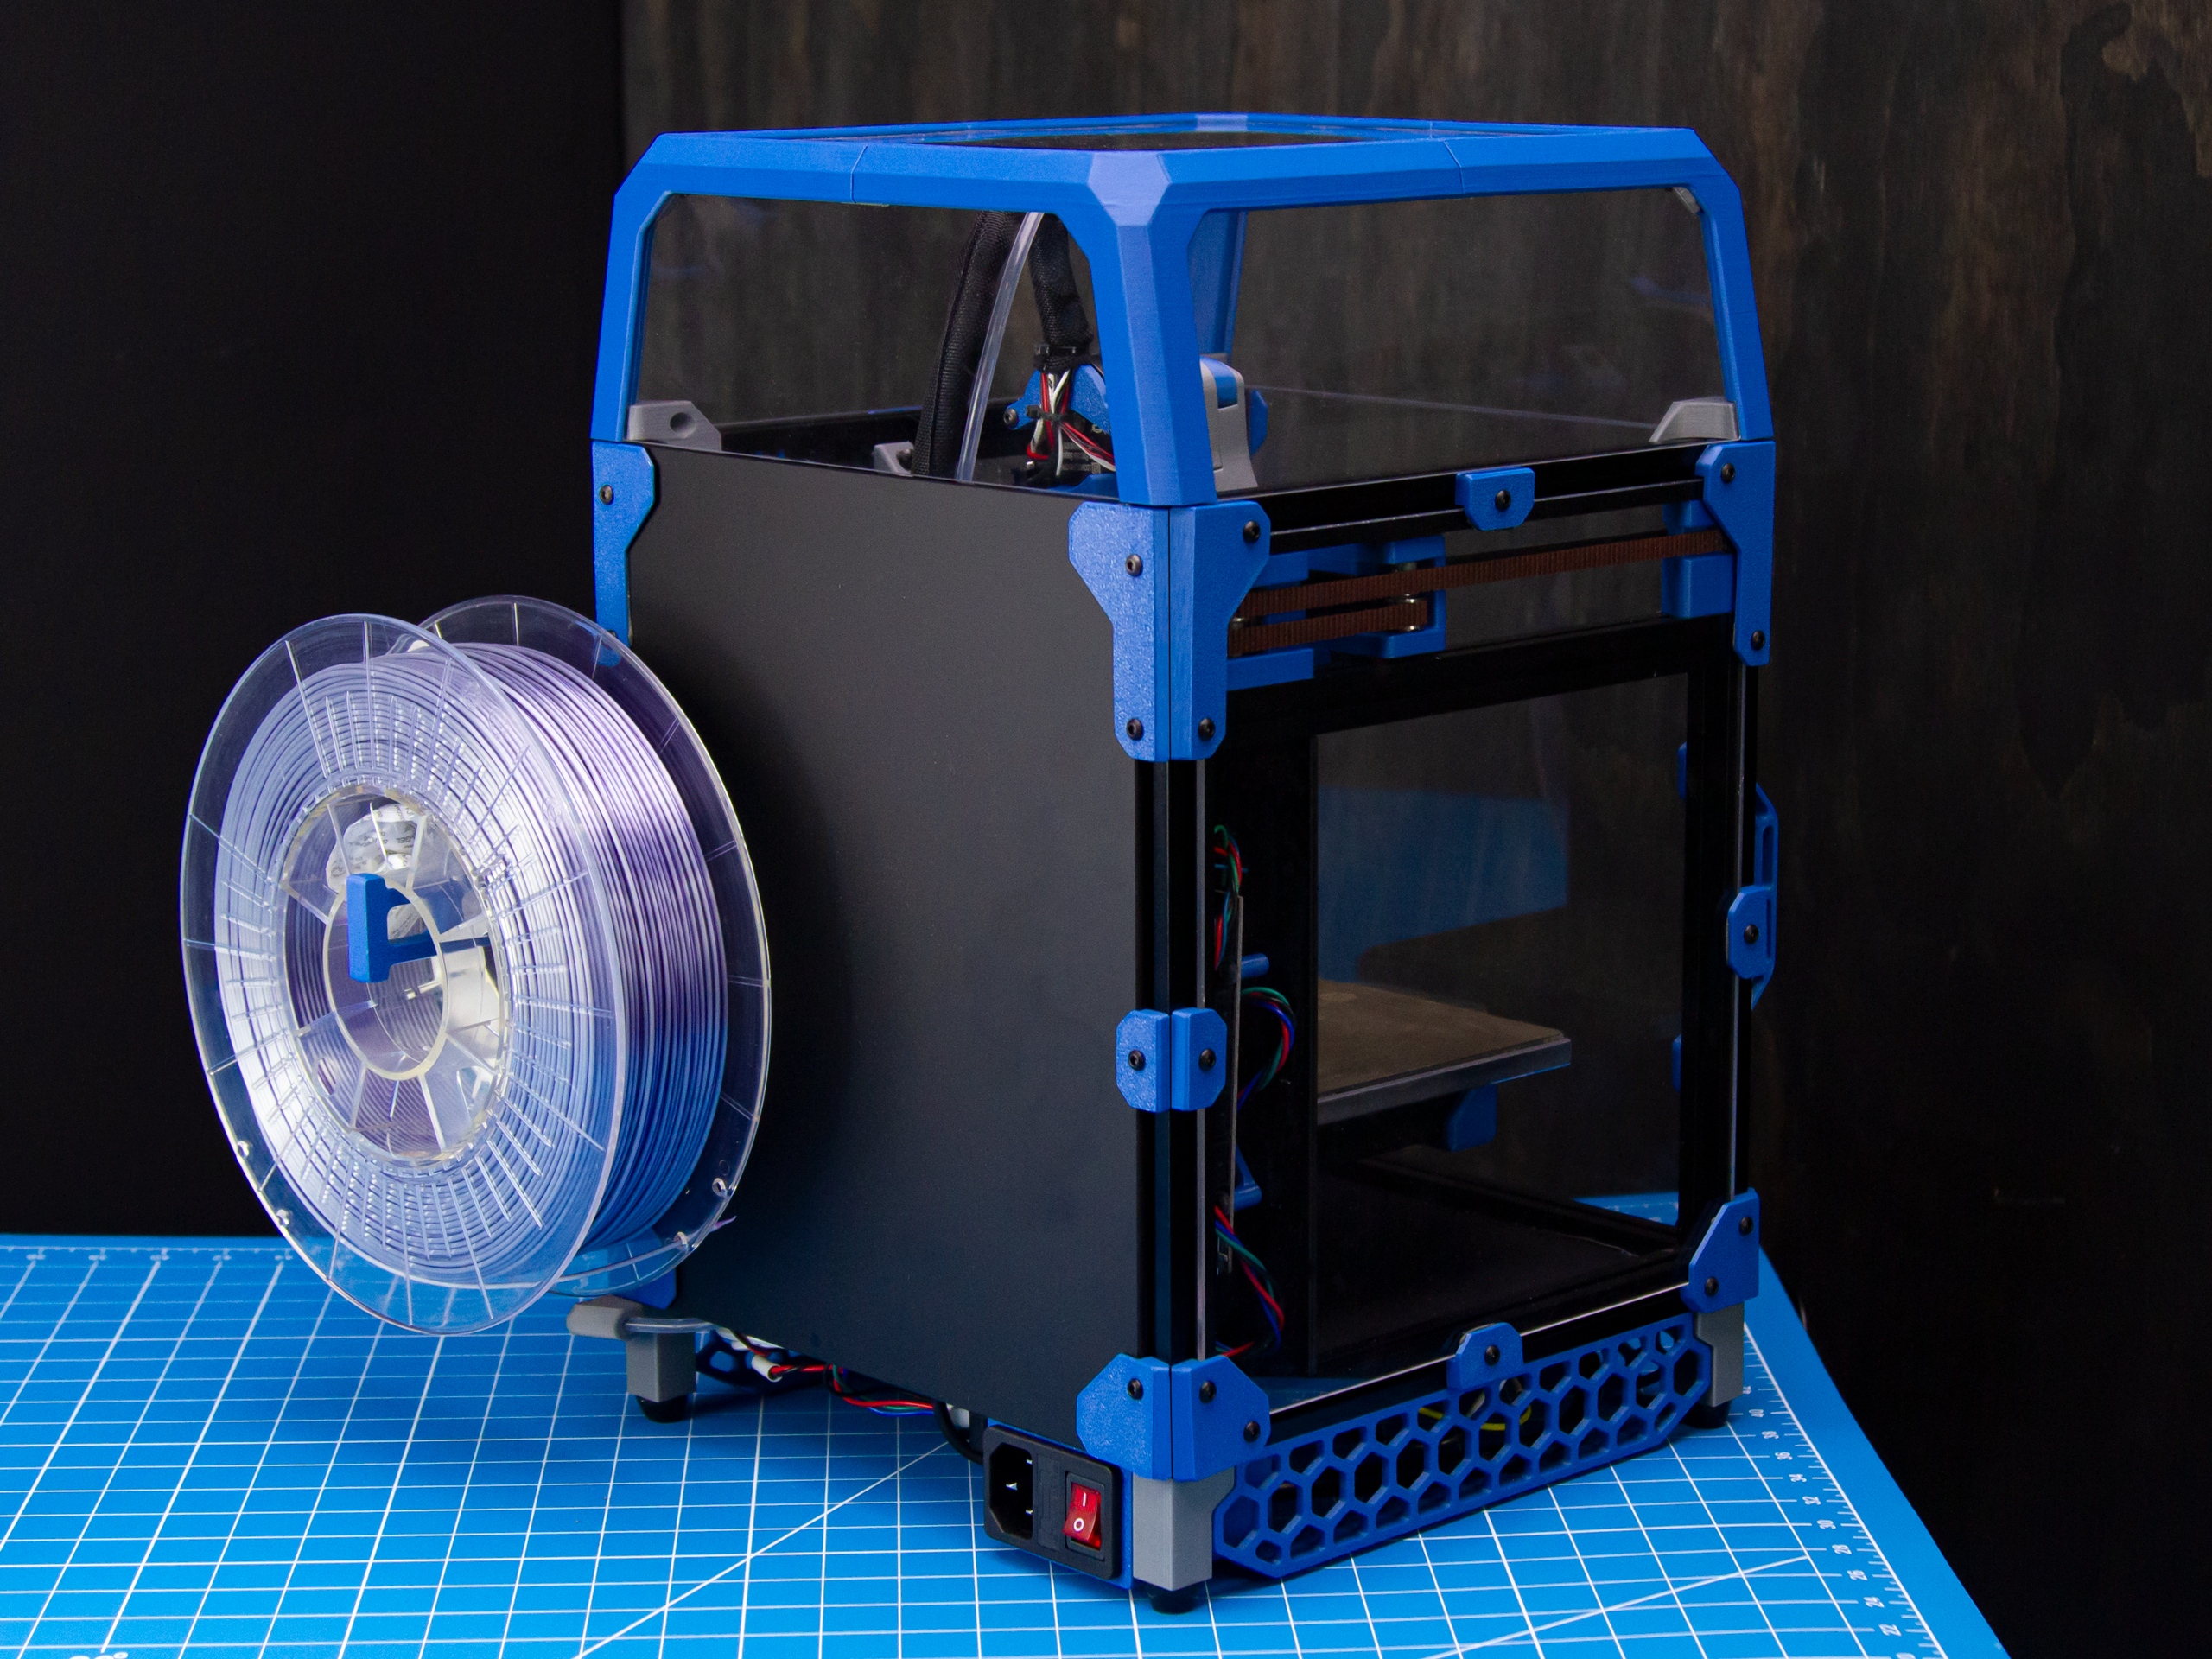 Get the best results with the Ultimaker S5 3D printer